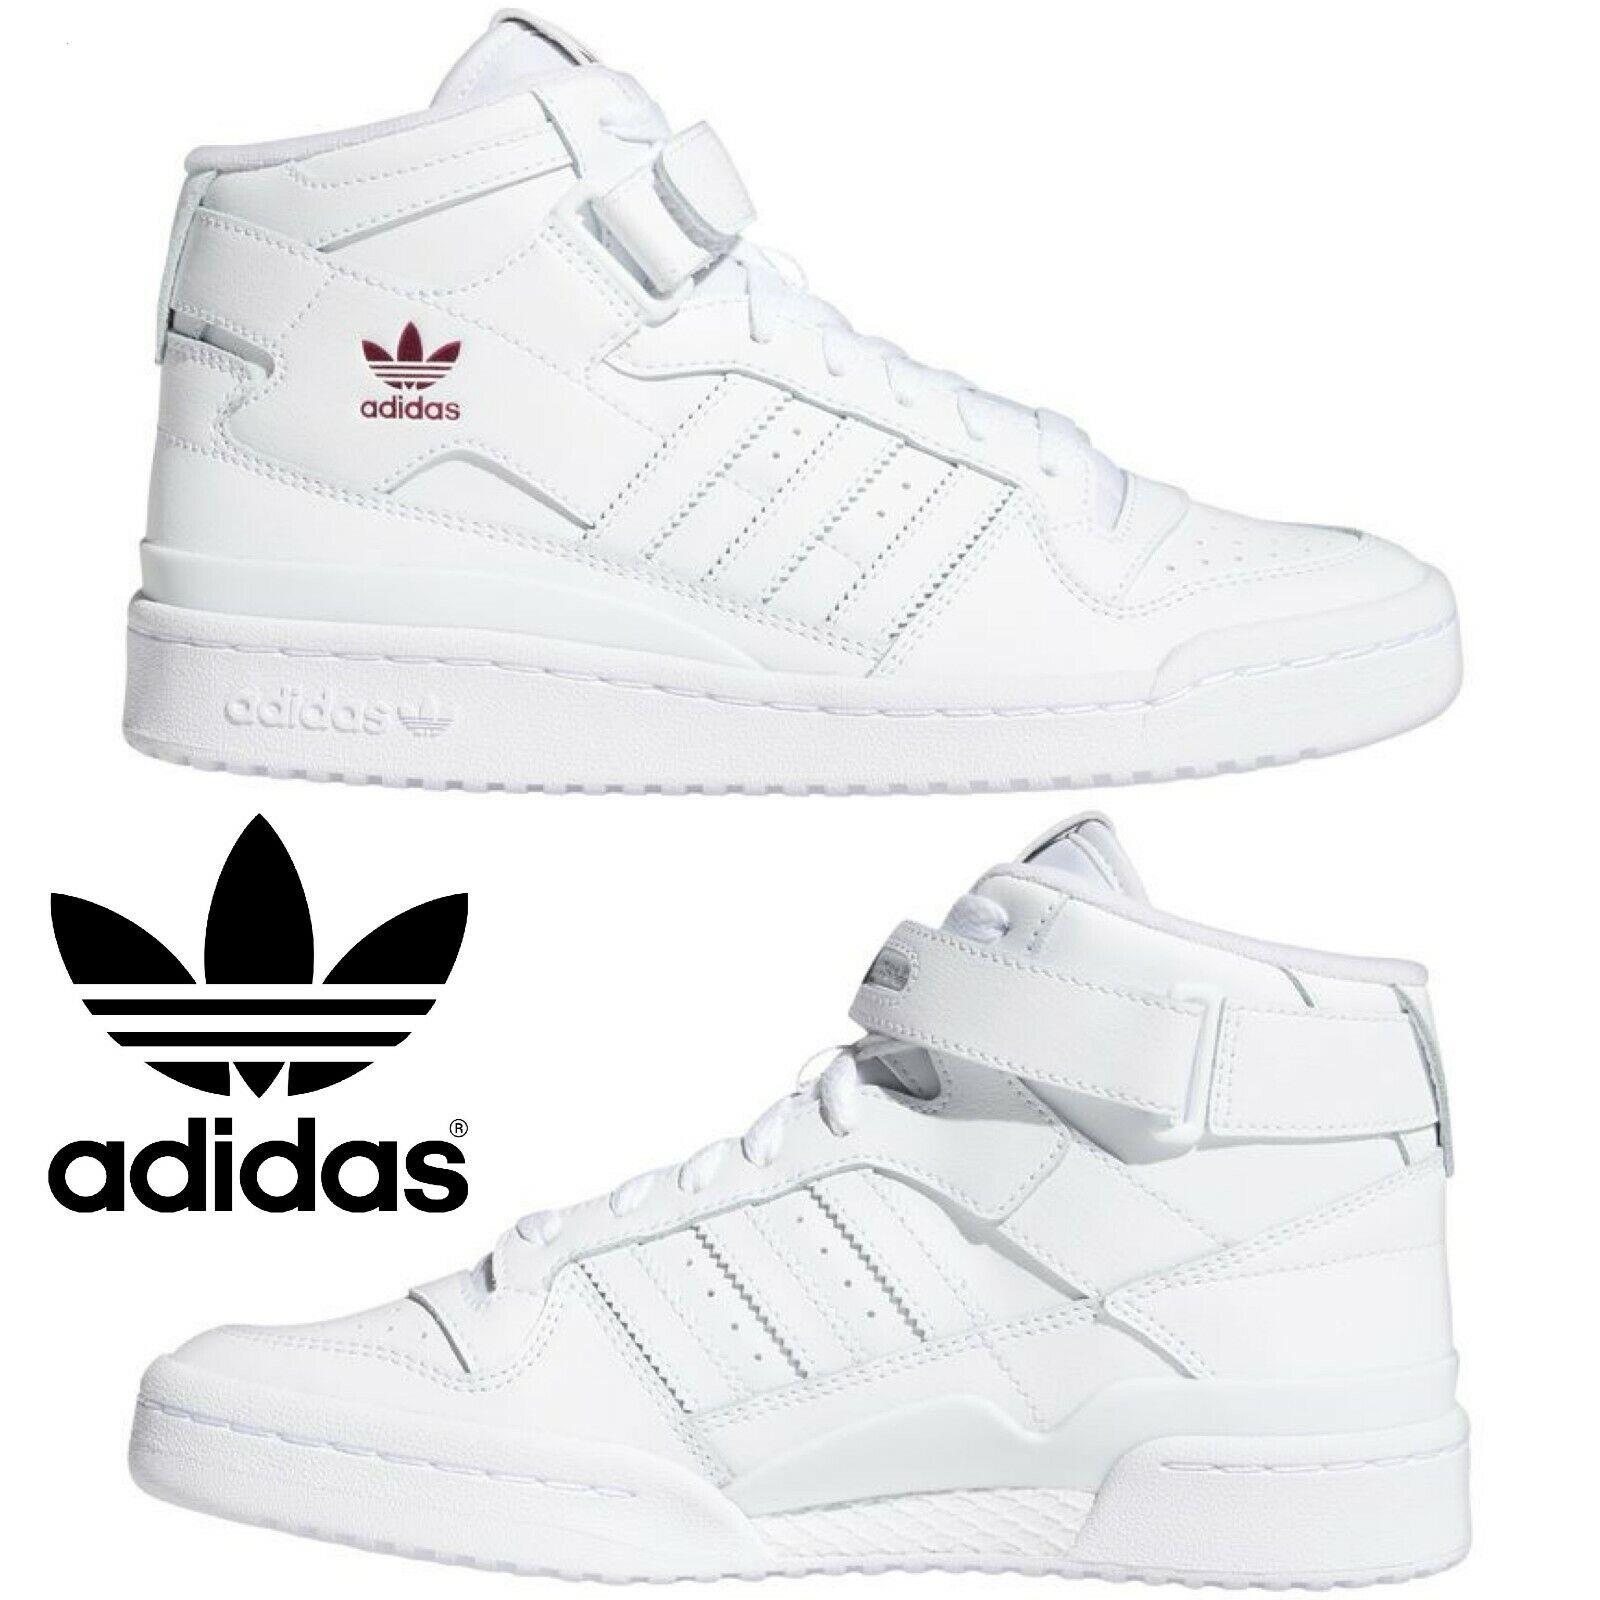 Adidas Originals Forum Mid Women`s Sneakers Comfort Casual Shoes White Pink